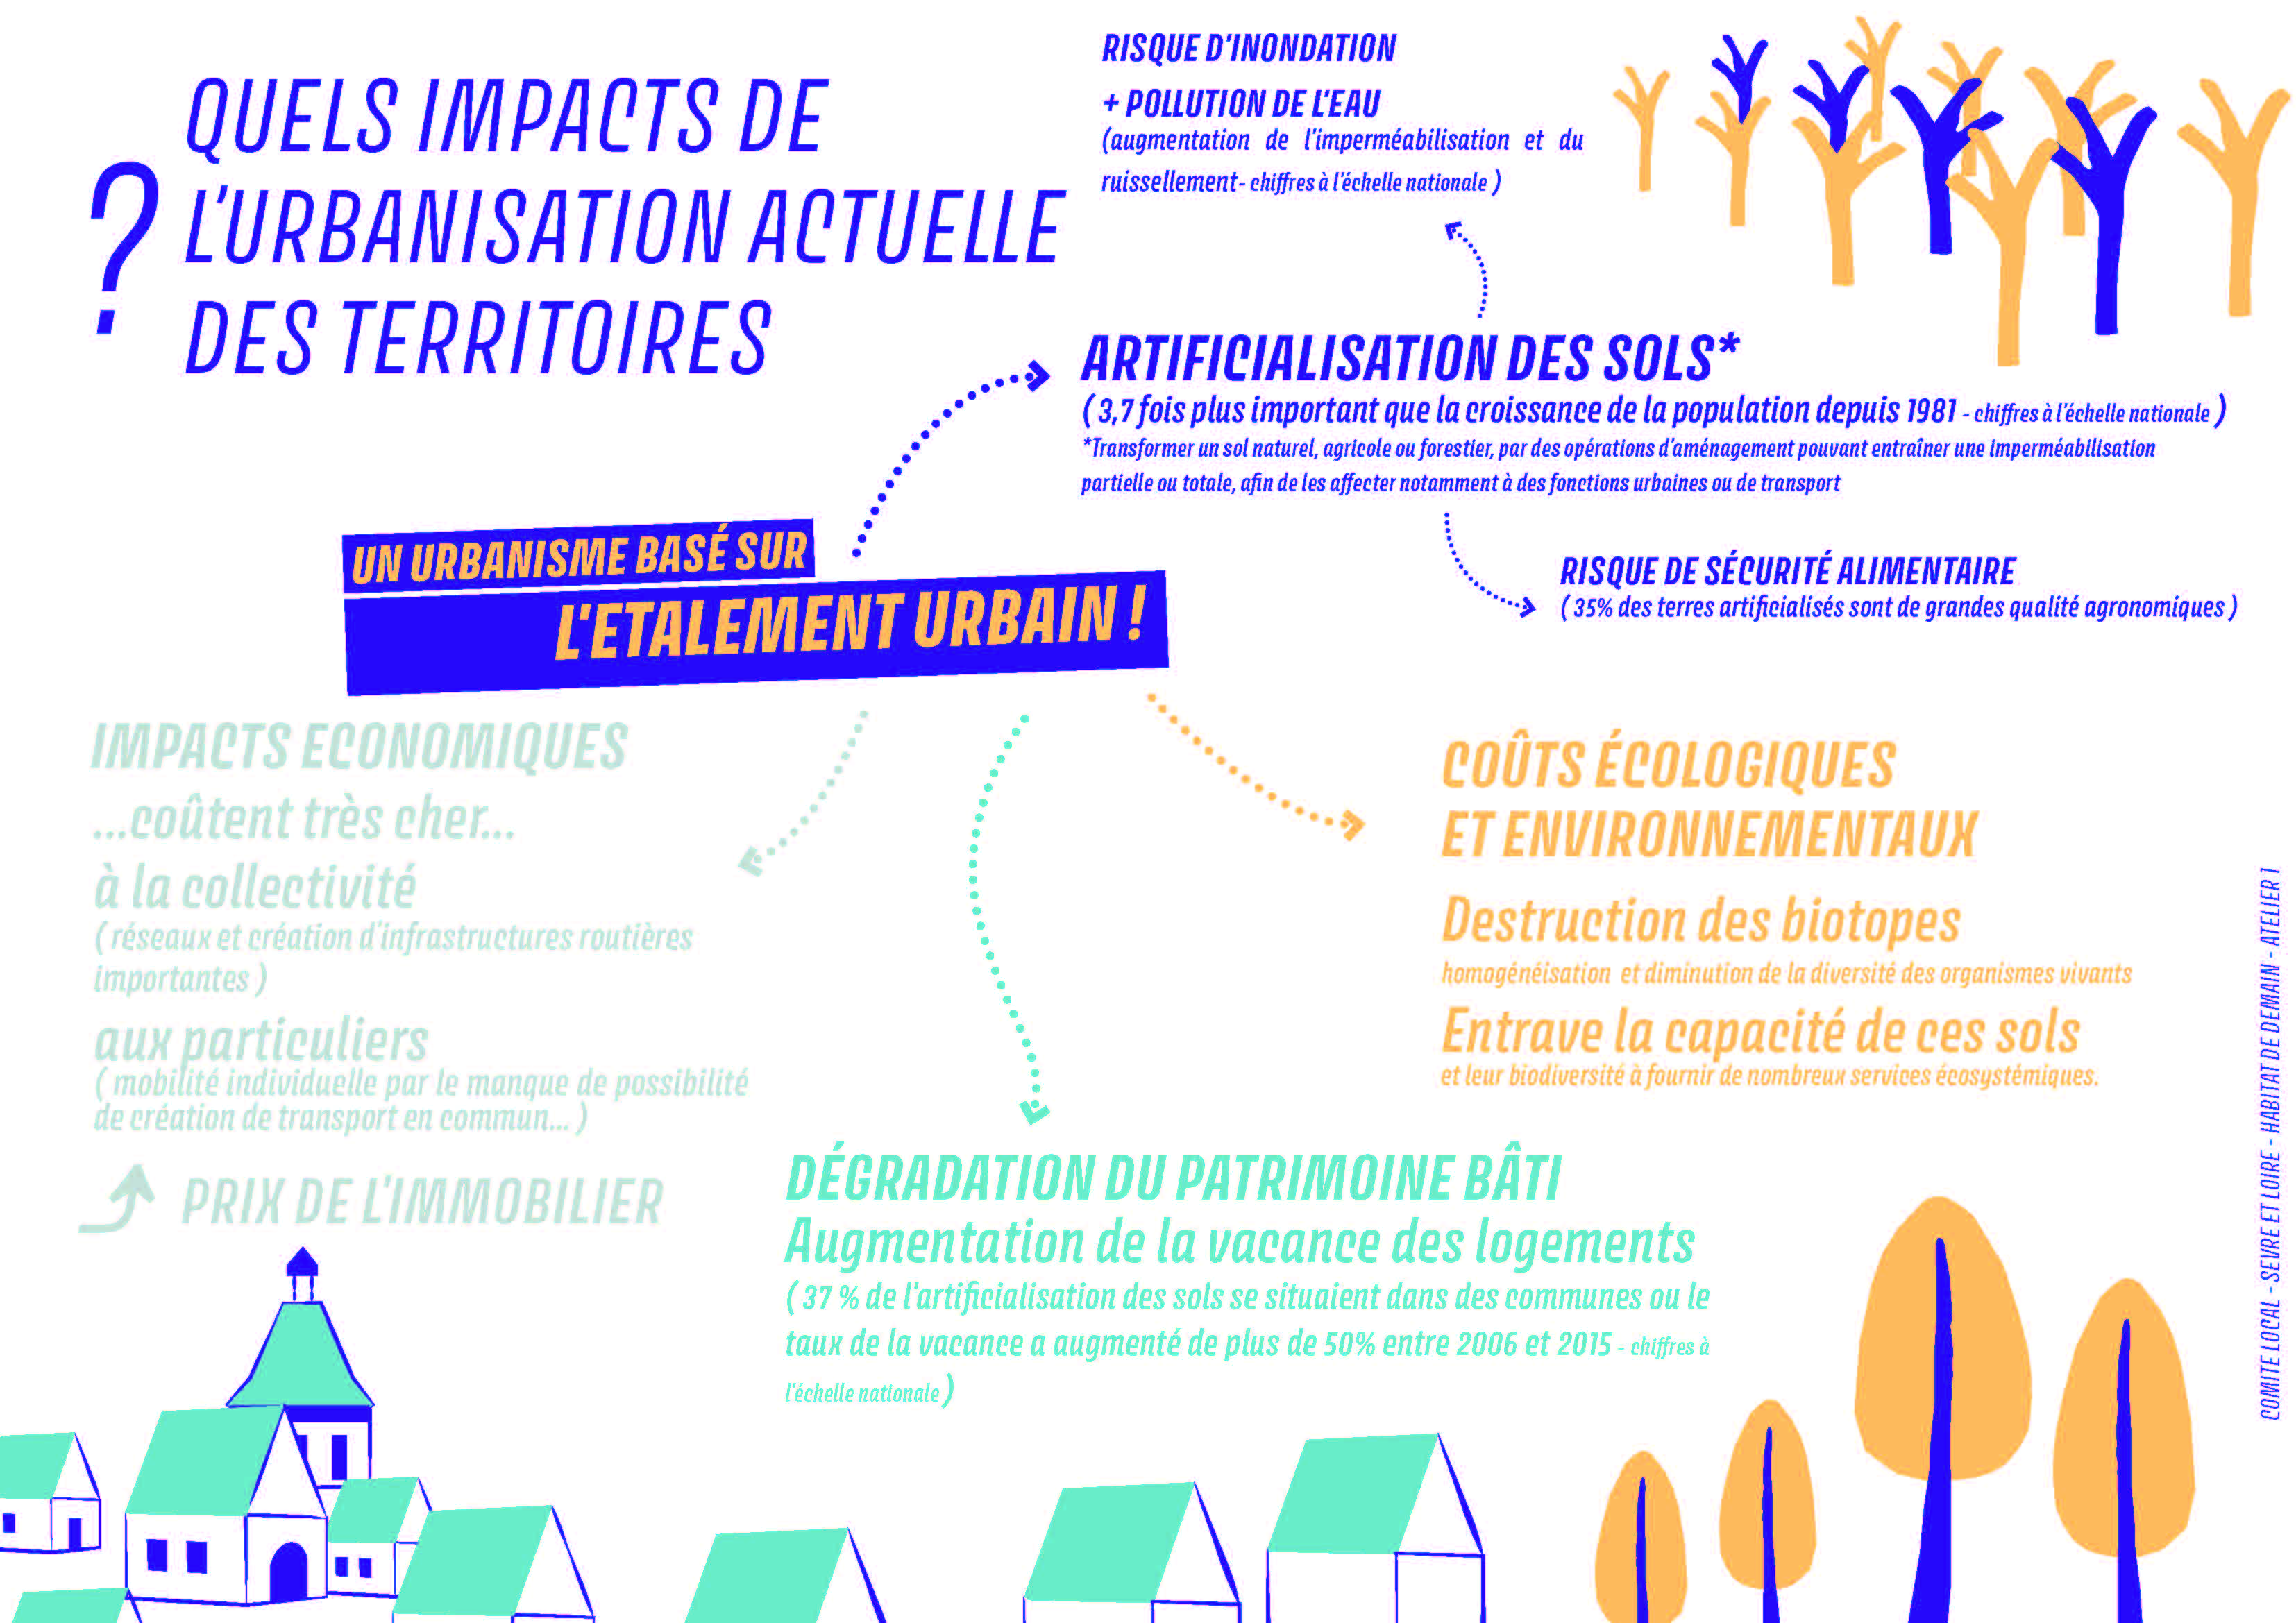 Synthese_Atelier1_CCSL_Comite_local_VFINALE (1)_Page_08